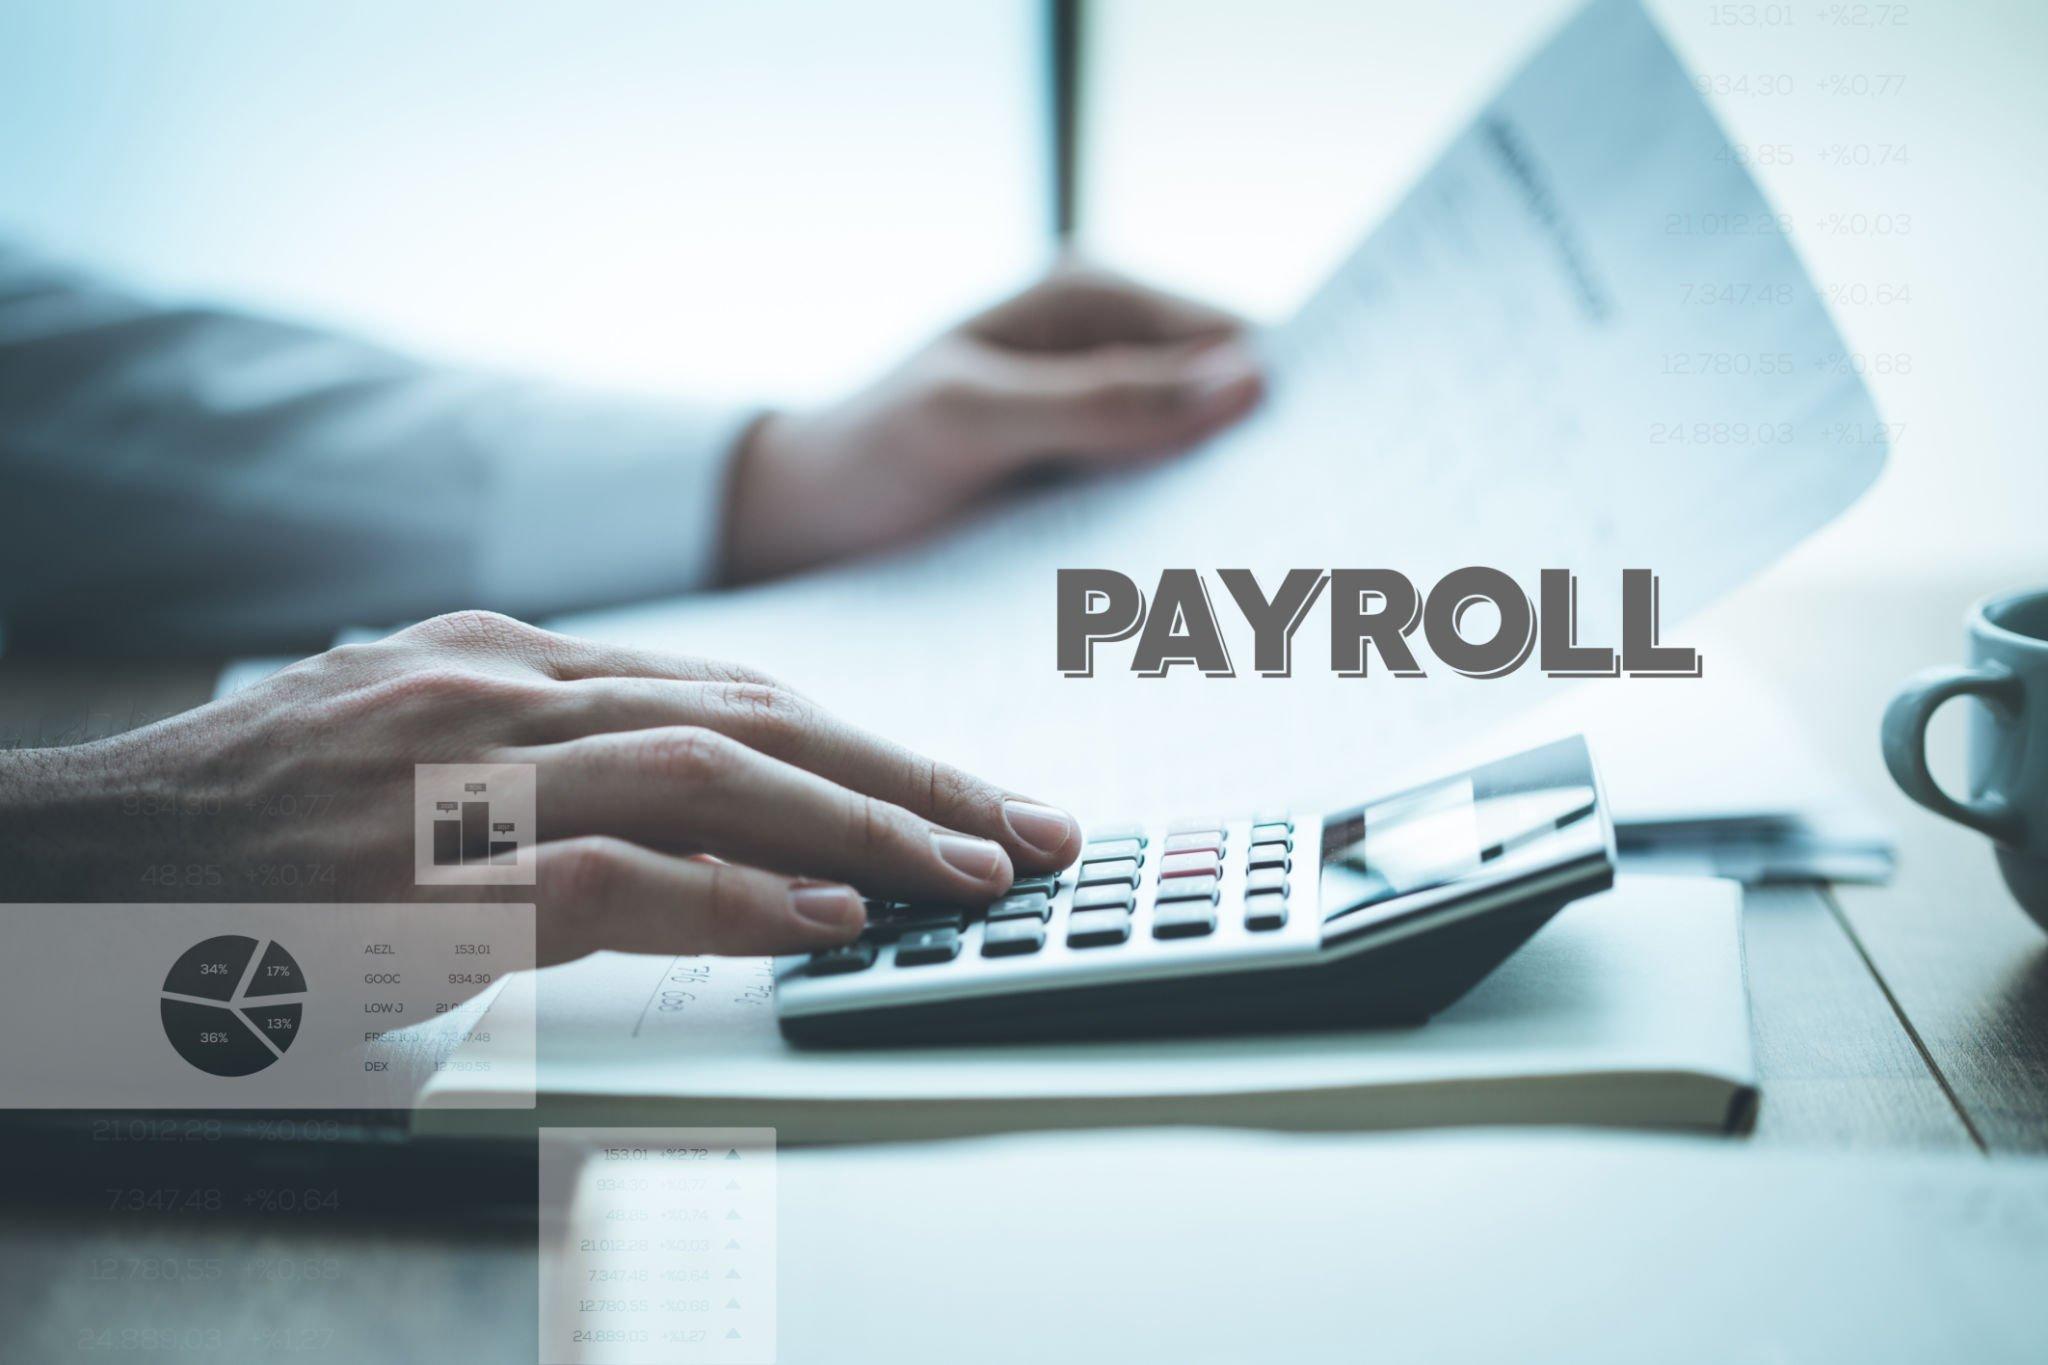 HR AND PAYROLL SOLUTIONS